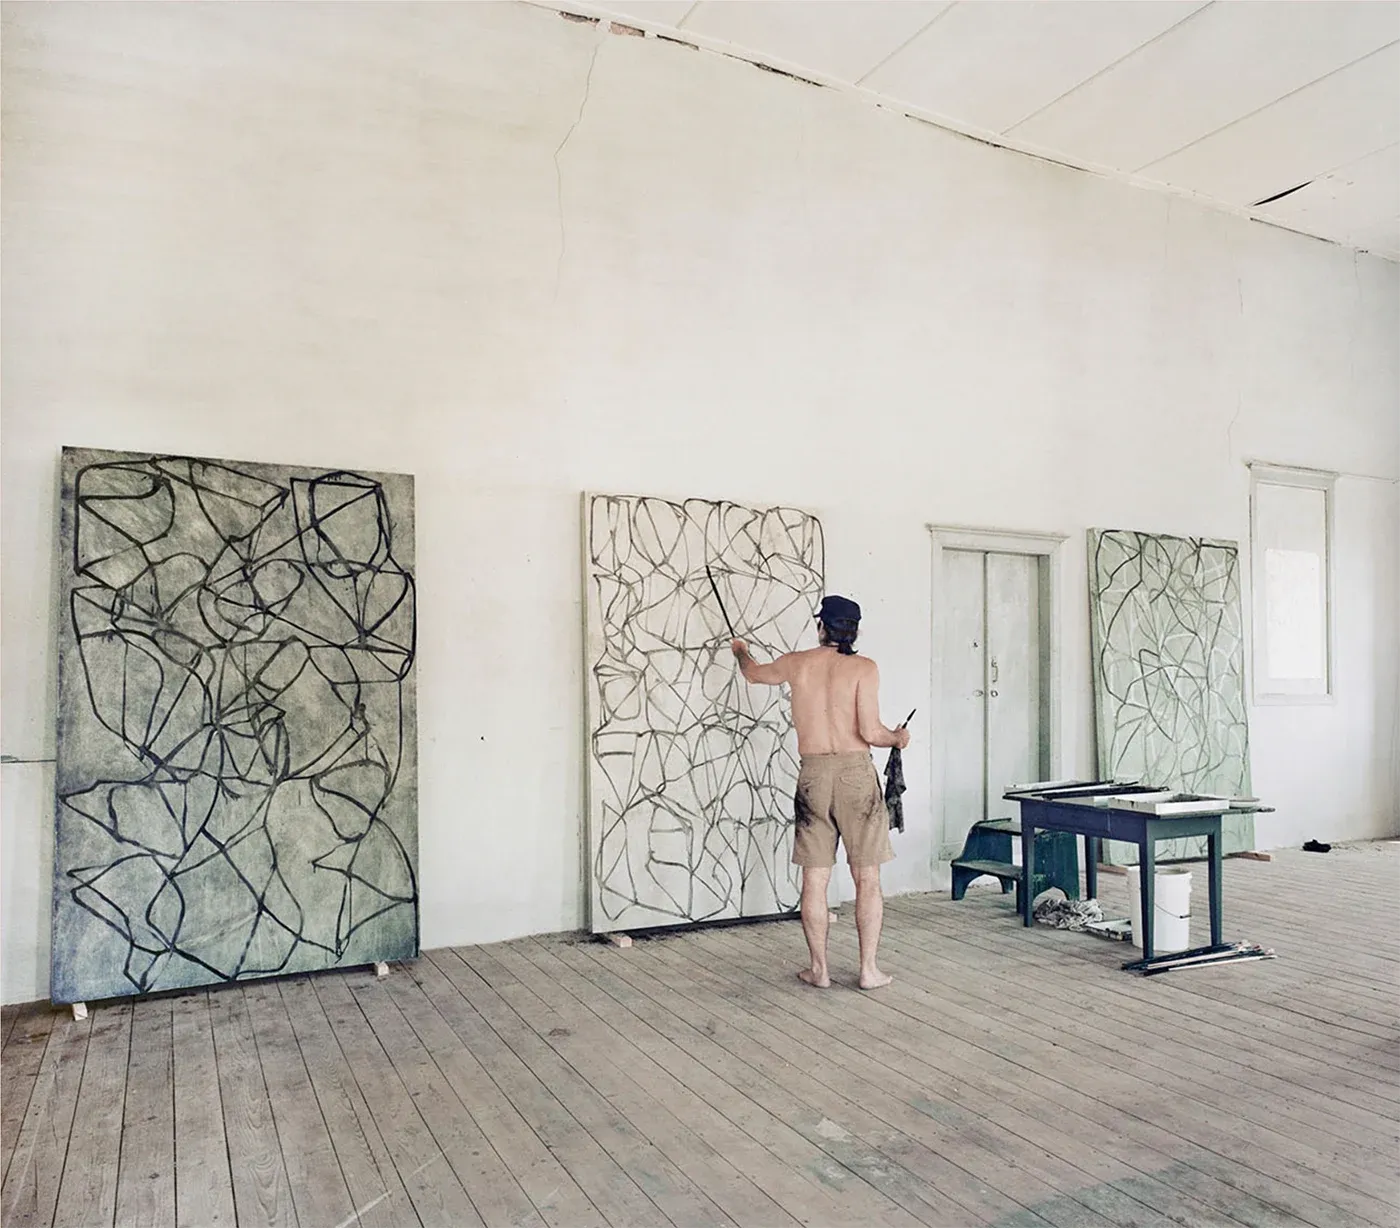 Brice Marden in his hydra island studio, creating minimalist and abstract works influenced by the serene Greek environment